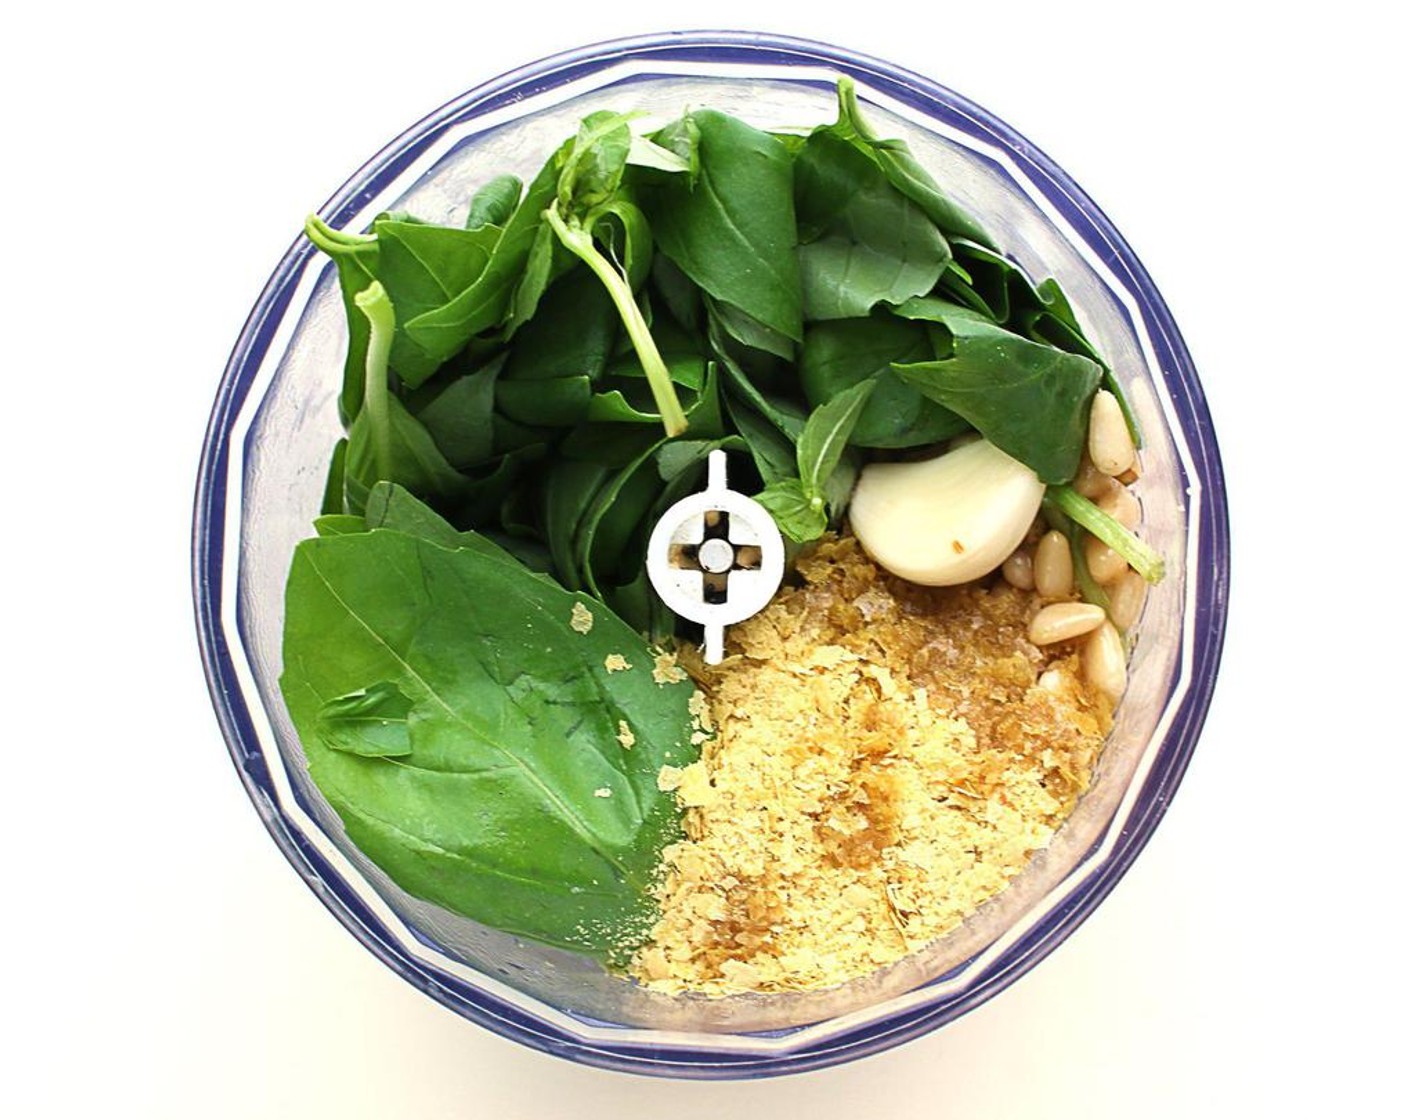 step 1 Add Fresh Basil (3 cups), Pine Nuts (1/3 cup), Nutritional Yeast (3 Tbsp), Olive Oil (1/4 cup), Garlic (1 clove), the juice from Lemon (1), Salt (1/4 tsp) to a small food processor or blender.